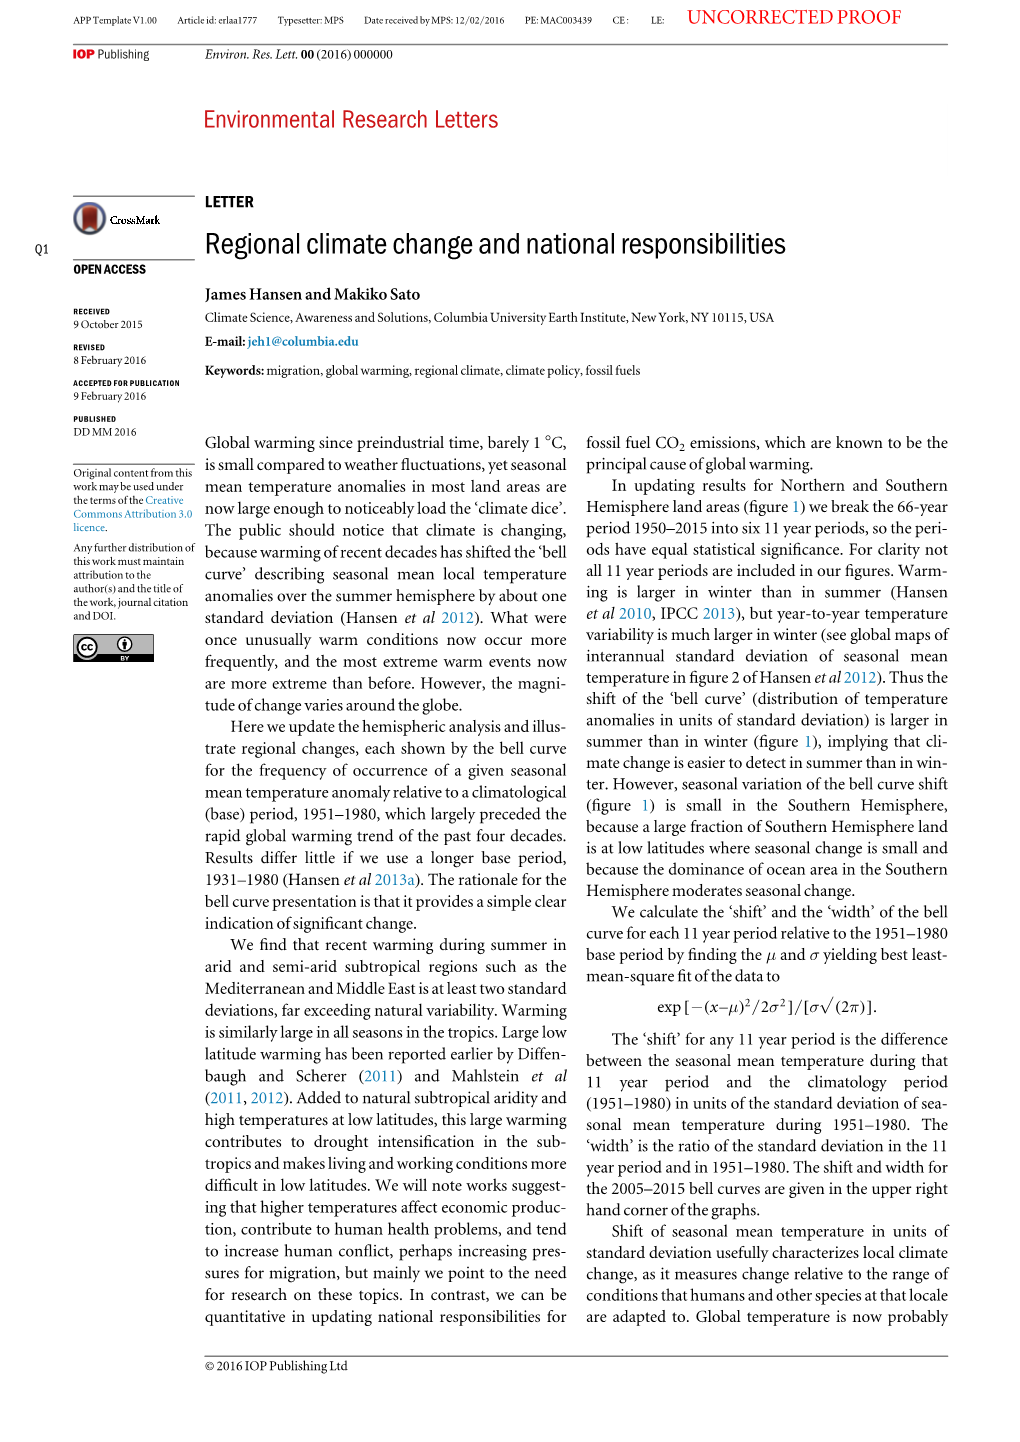 Regional Climate Change and National Responsibilities